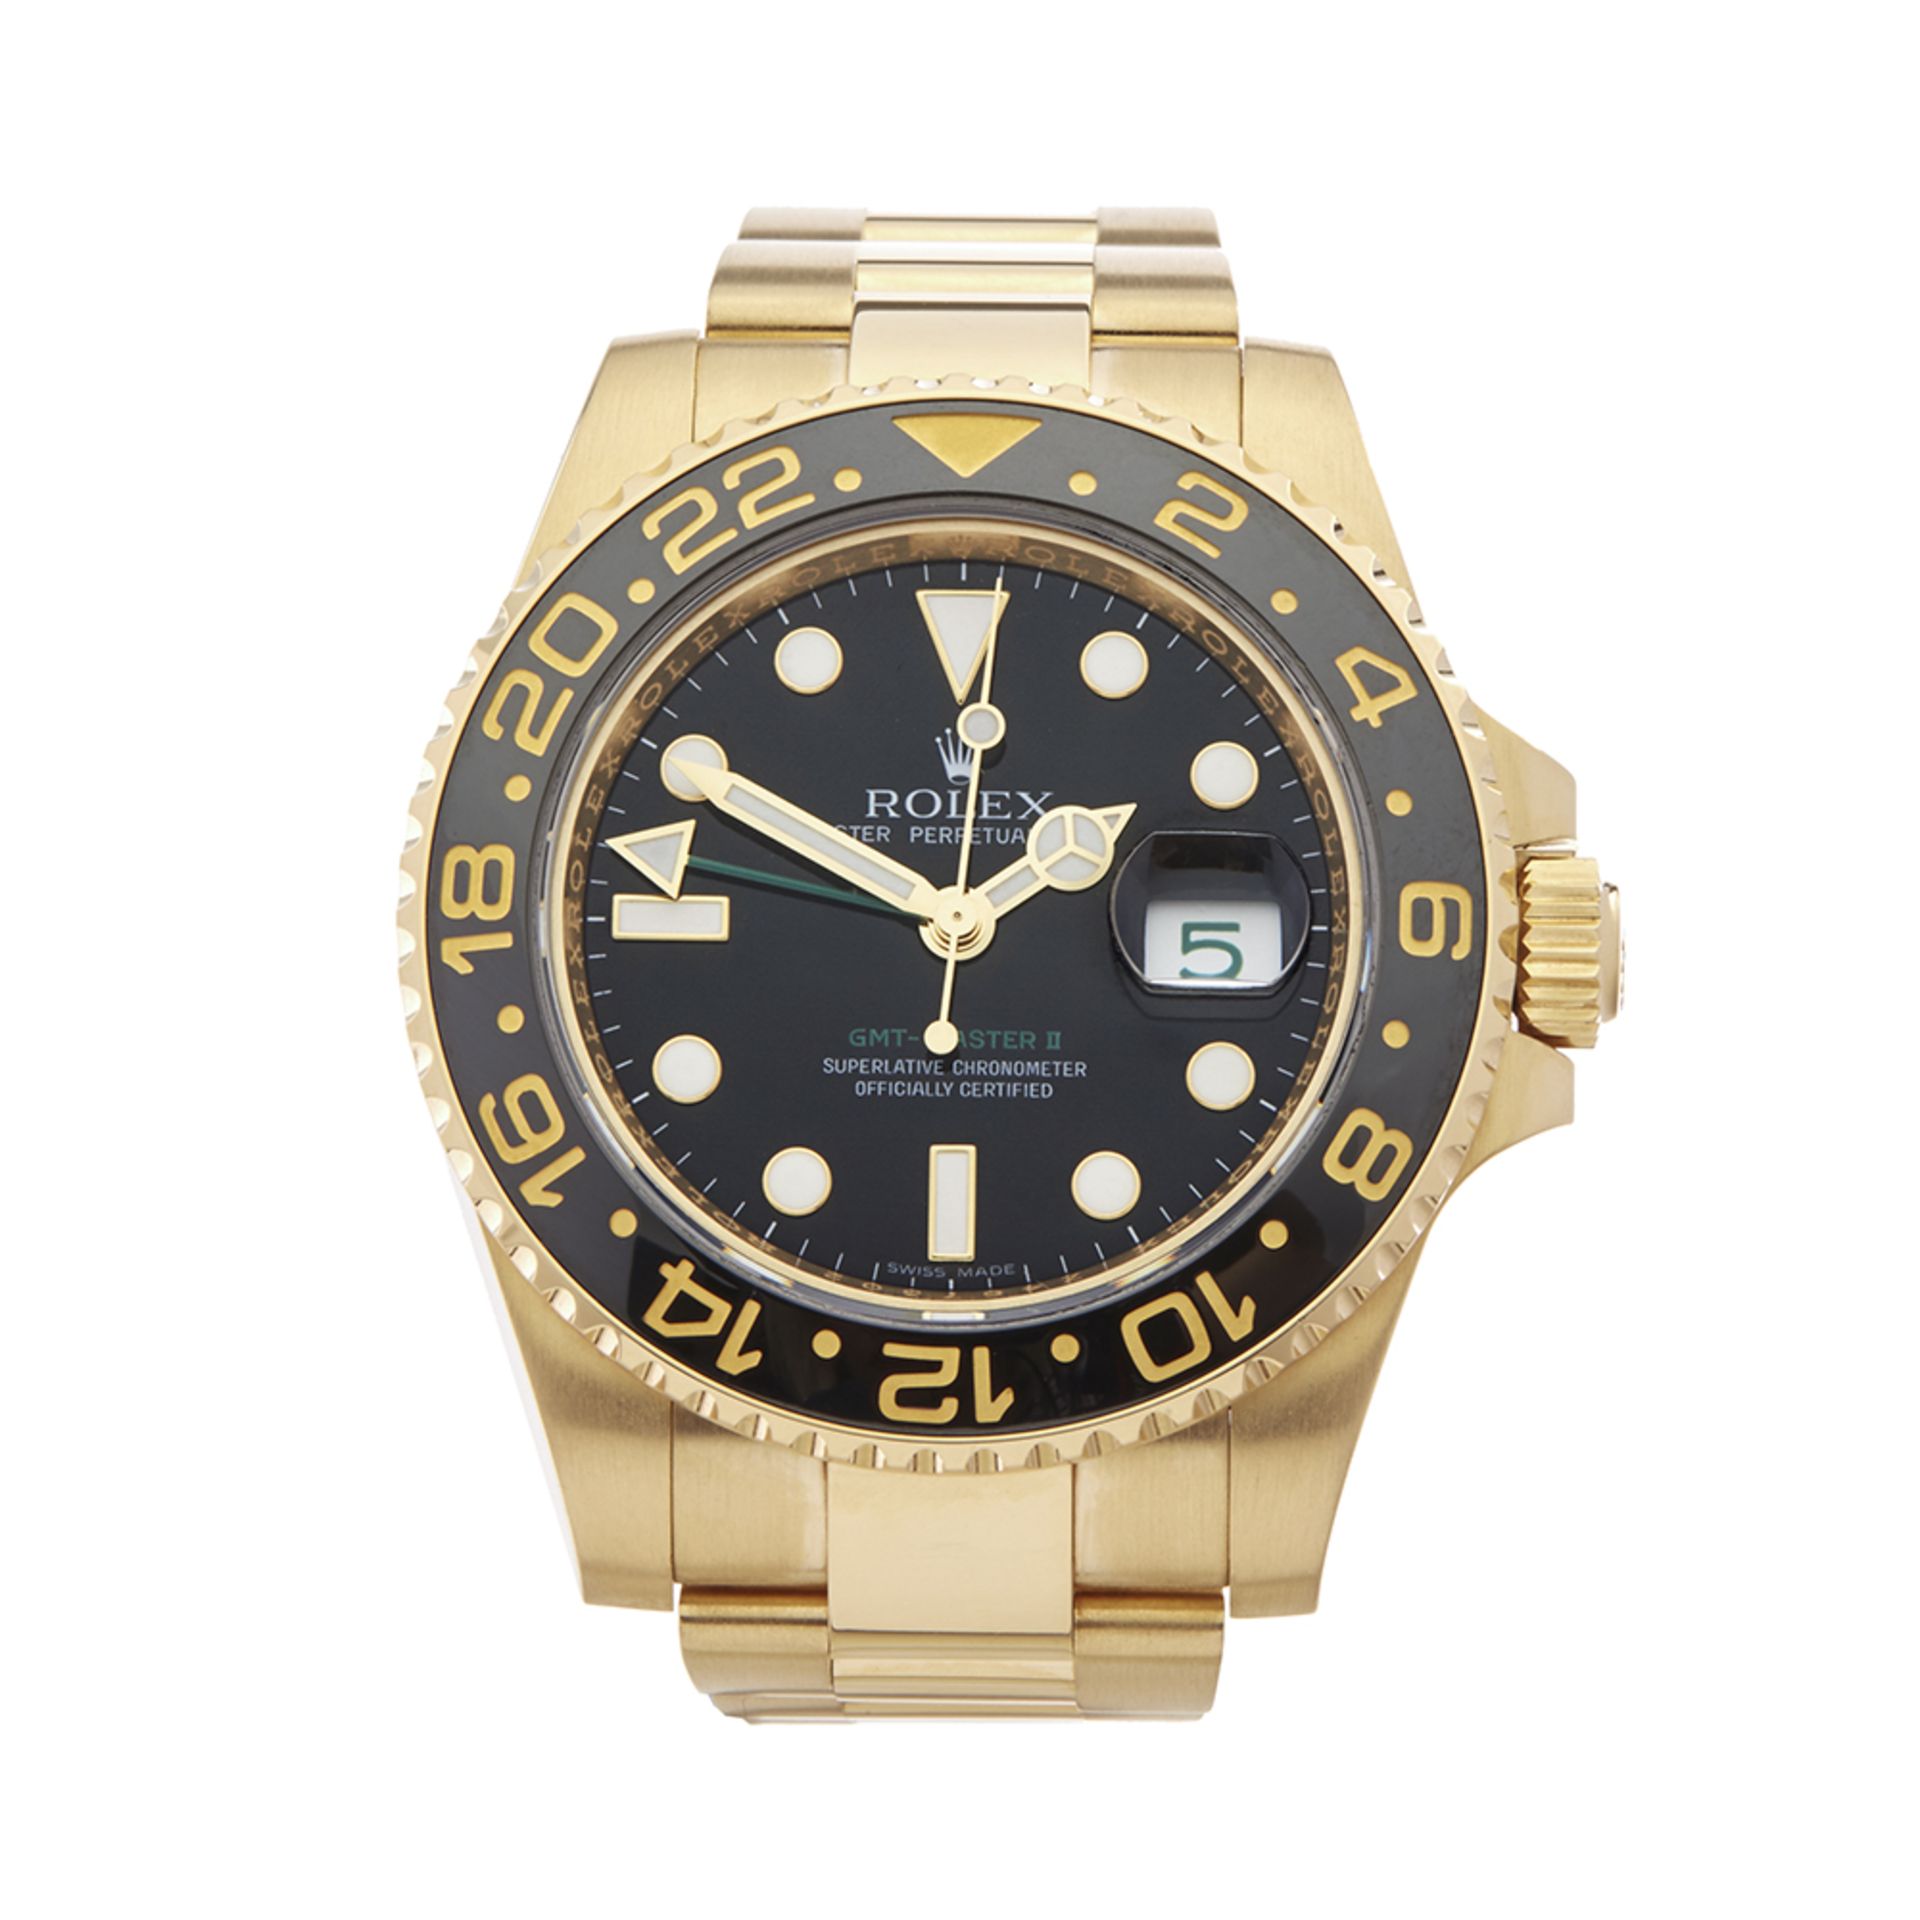 Rolex GMT-Master II 40mm 18k Yellow Gold - 116718 - Image 2 of 7